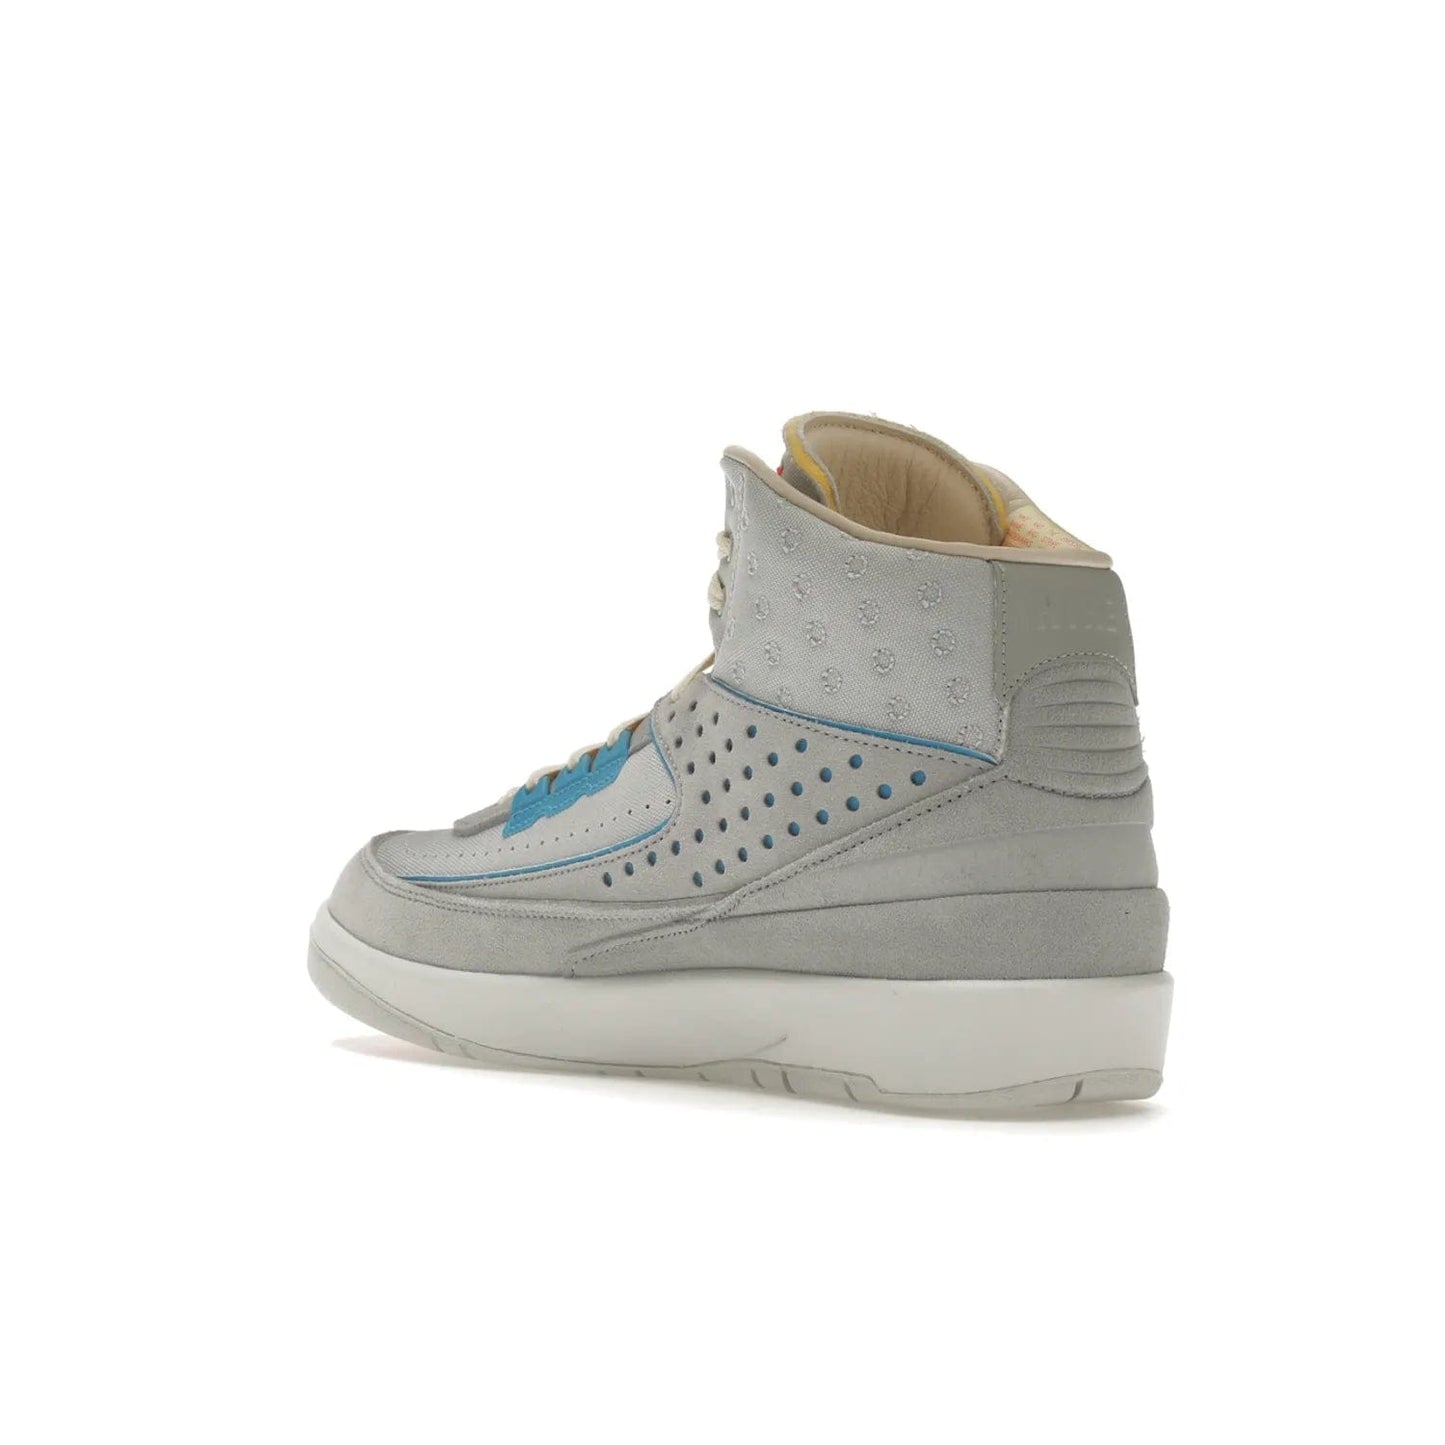 Jordan 2 Retro SP Union Grey Fog - Image 24 - Only at www.BallersClubKickz.com - Introducing the Air Jordan 2 Retro SP Union Grey Fog. This intricate sneaker design features a grey canvas upper with light blue eyelets, eyestay patches, and piping, plus custom external tags. Dropping in April 2022, this exclusive release offers a worn-in look and feel.